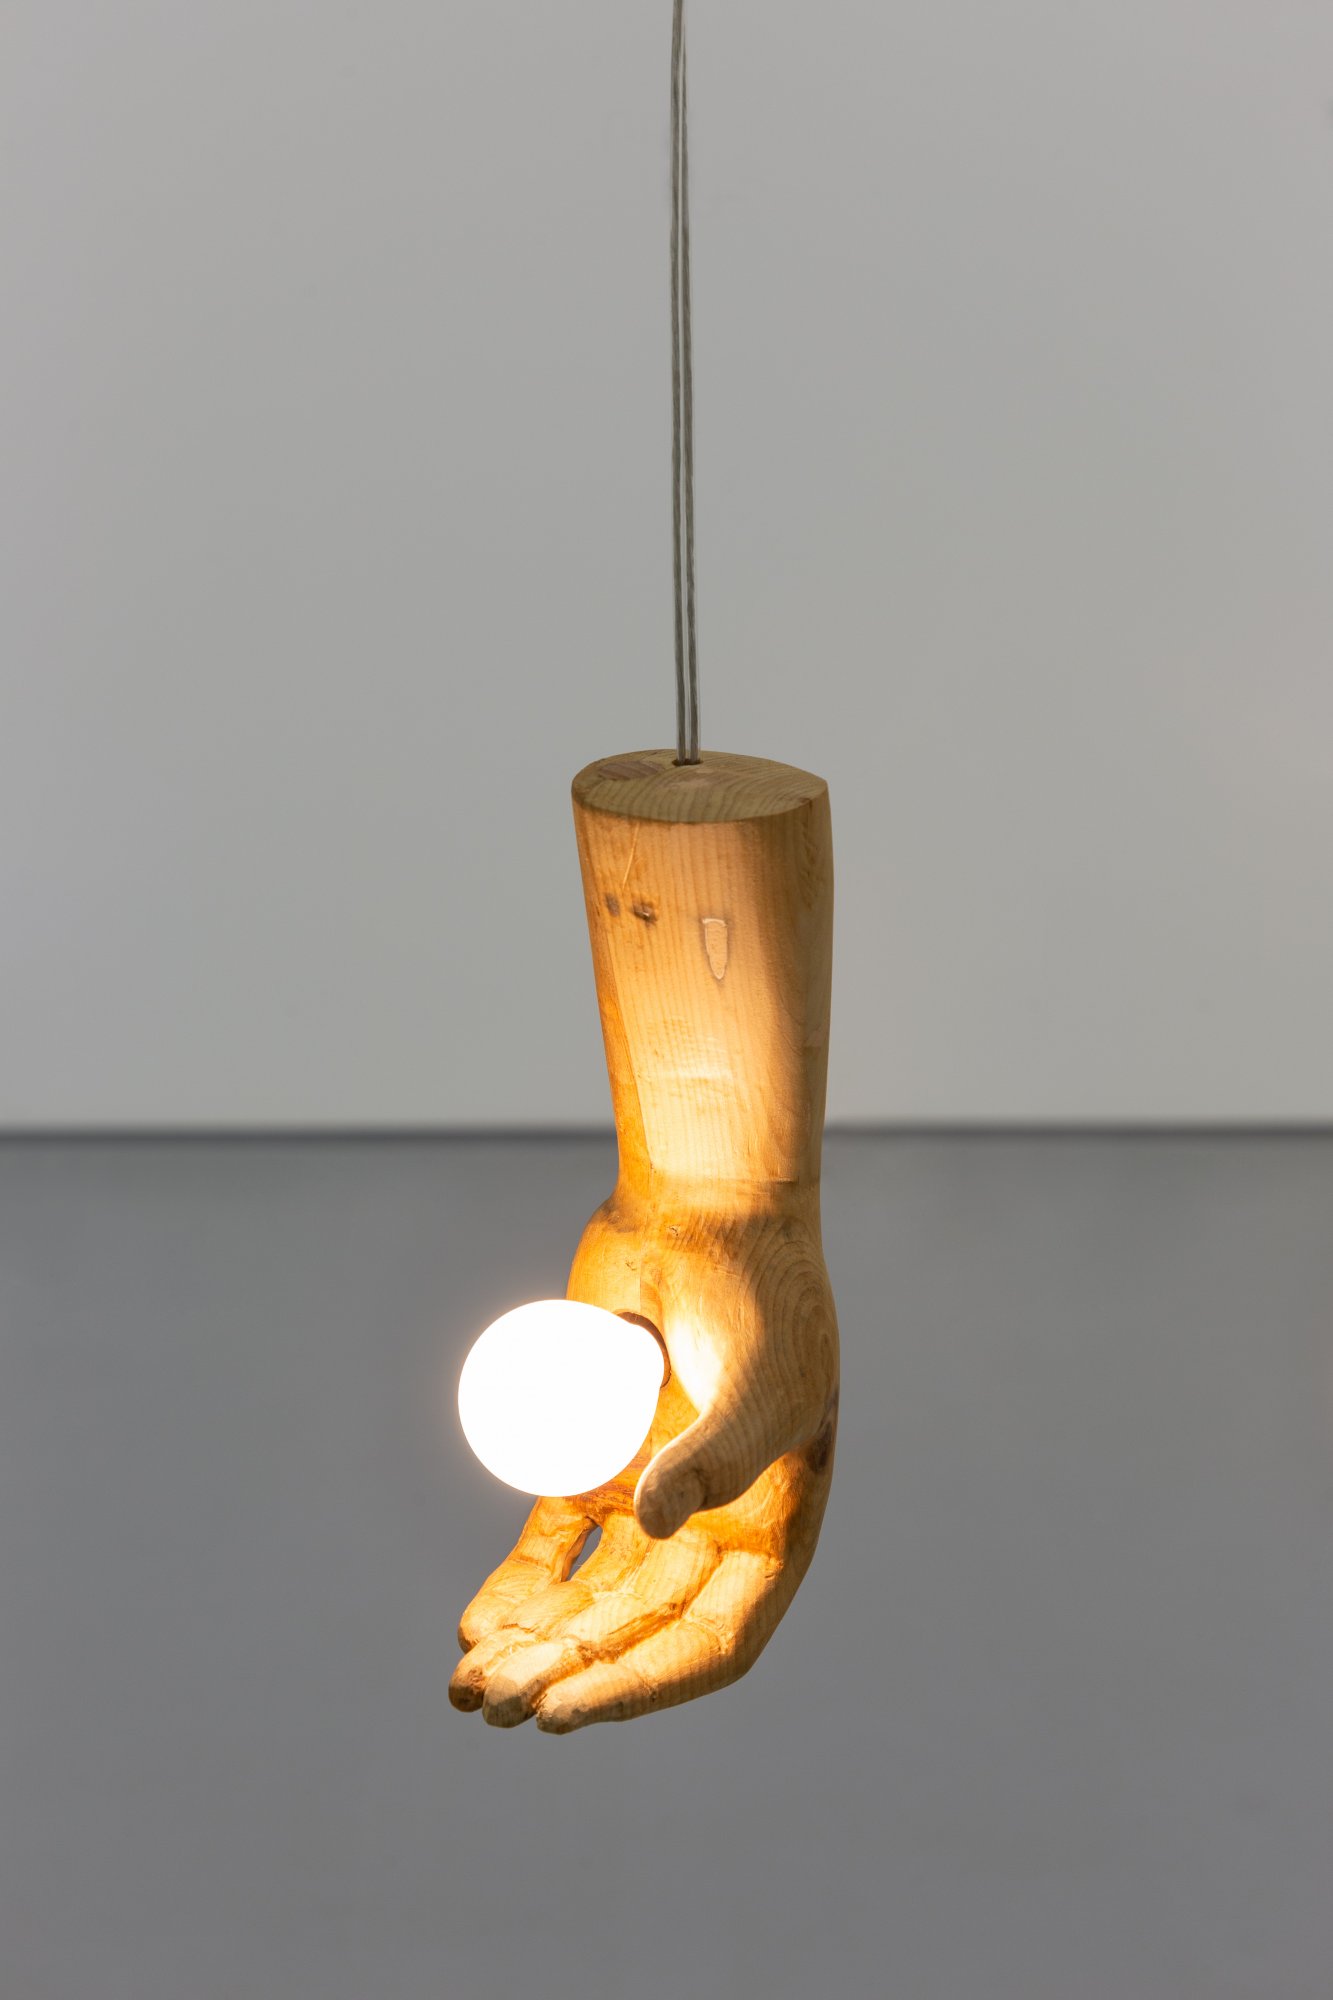 André Romão, The visitor (left), 2022. Re-worked sculptural fragment (wood, probably Spain, late 1700s), wood, electrical components, light bulb. 21 × 12 × 9 cm. Unique
